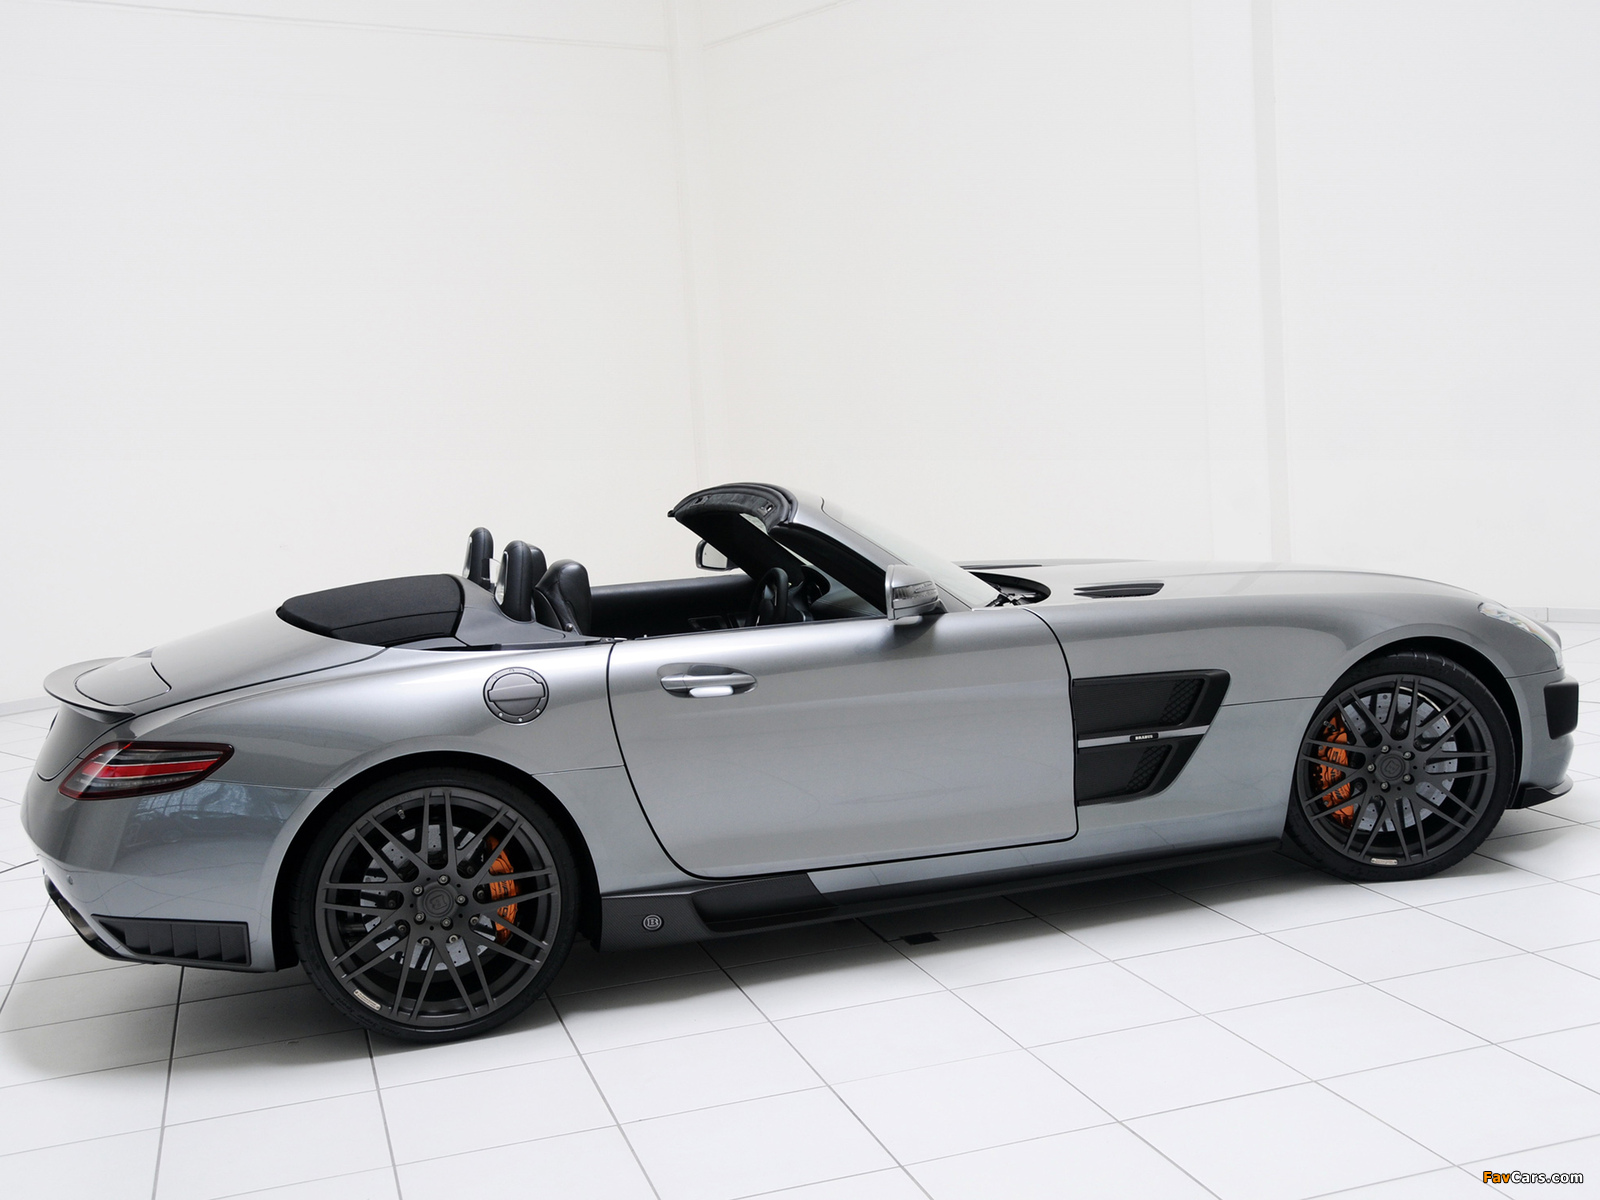 Brabus Mercedes-Benz SLS 63 AMG Roadster (R197) 2011 pictures (1600 x 1200)